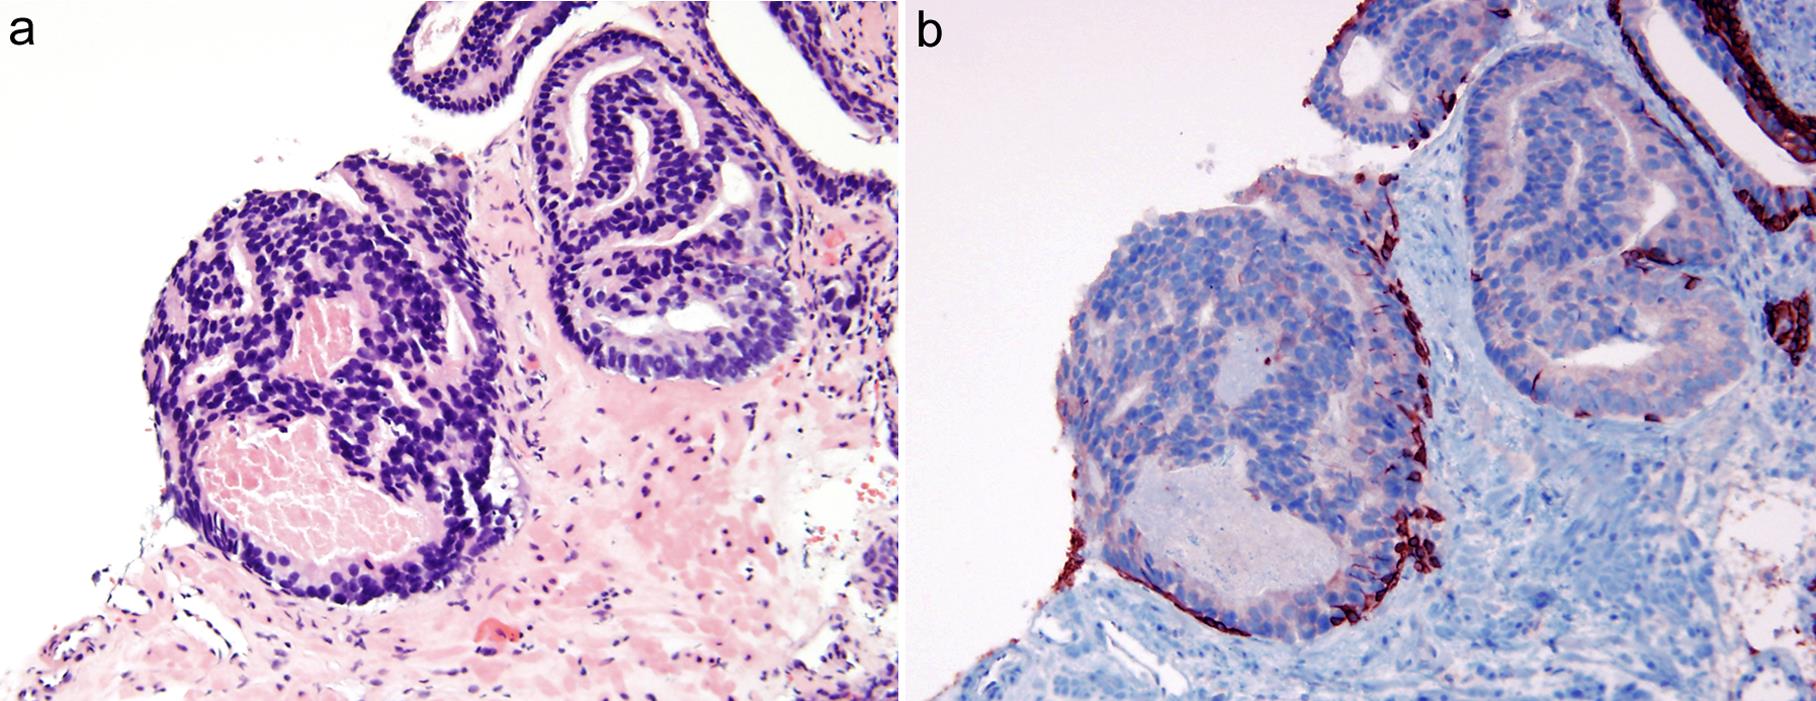 Atypical intraductal proliferation (AIP) shows atypical loose cribriform glands (a) (×200). On immunostain, AIP is positive for racemase and basal cell markers (CK903 and p63) (b) (×200).